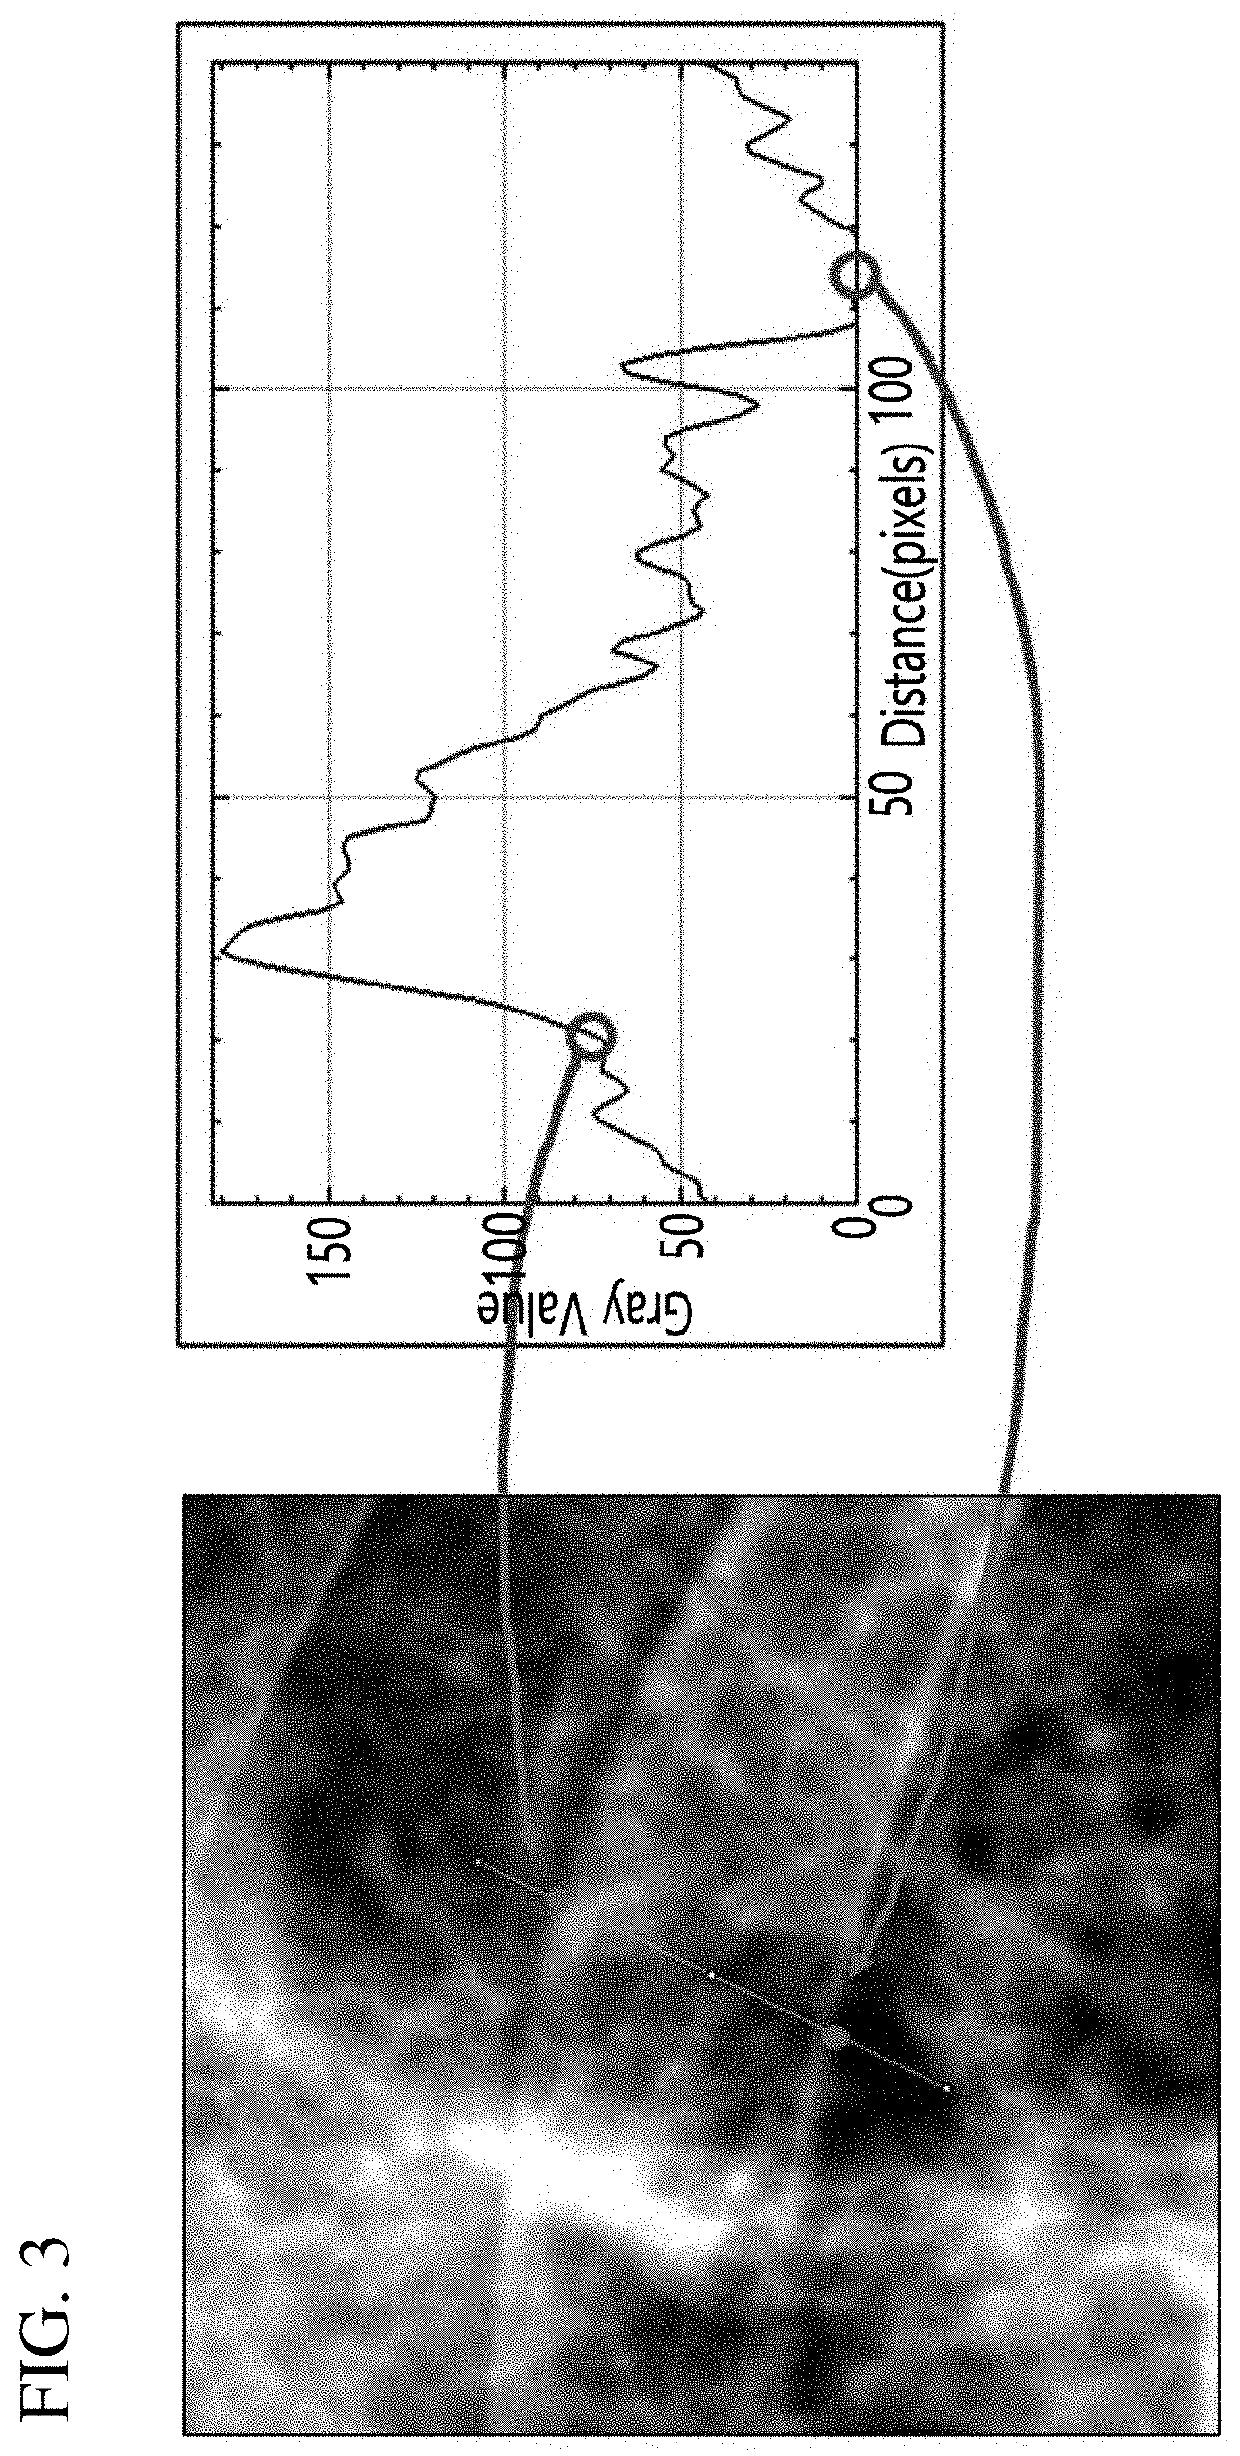 Method and apparatus for bone suppression in x-ray image